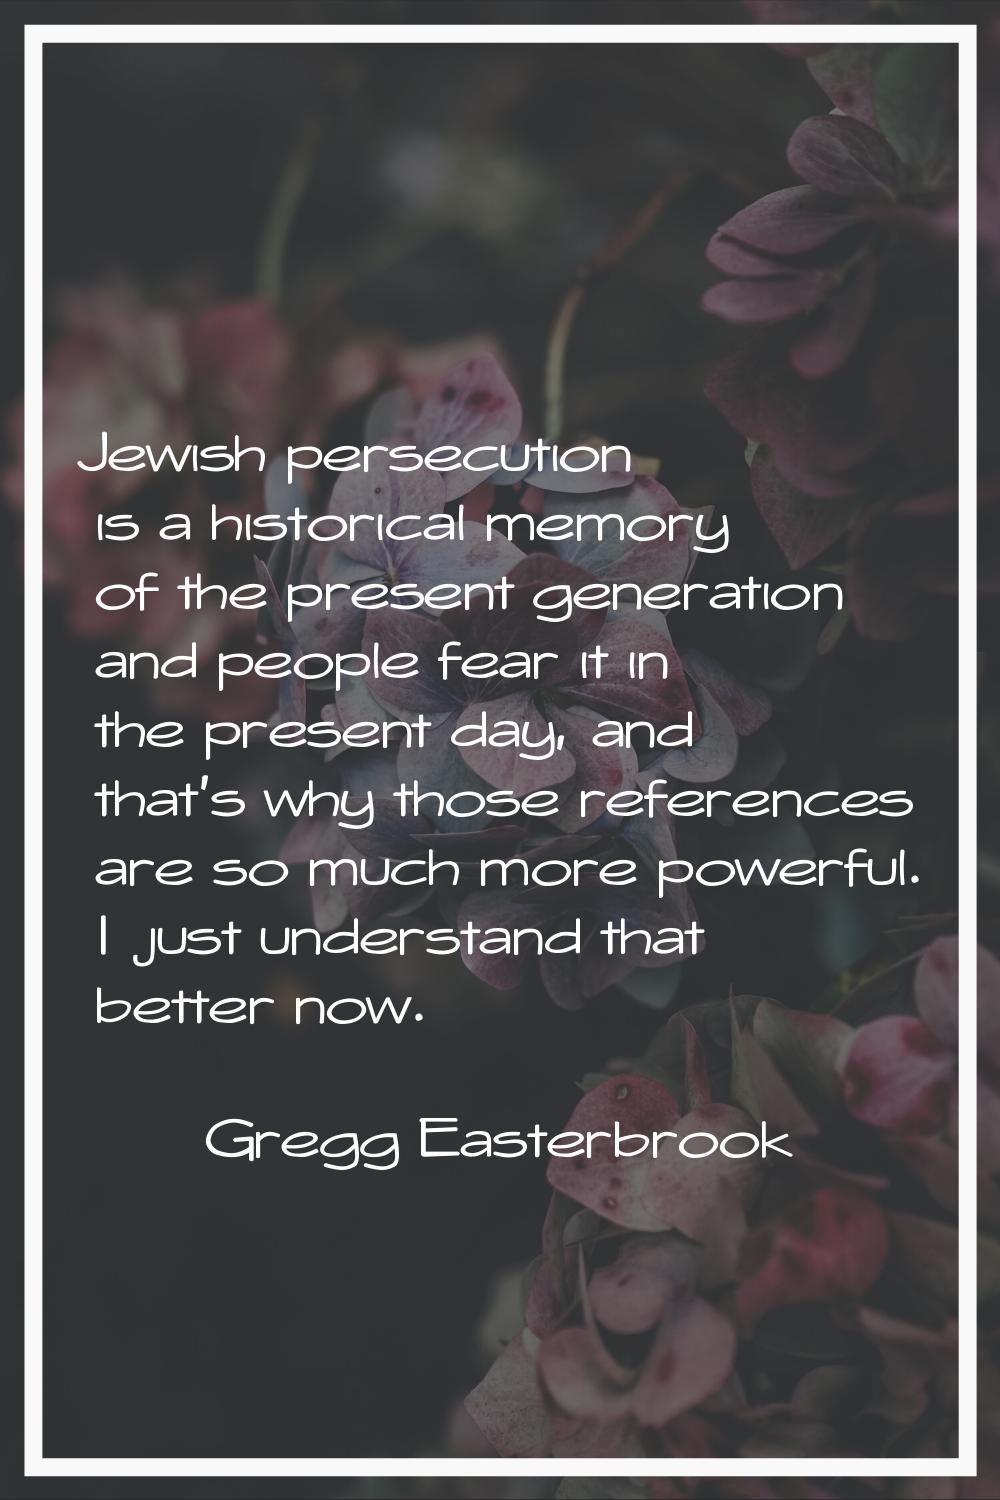 Jewish persecution is a historical memory of the present generation and people fear it in the prese